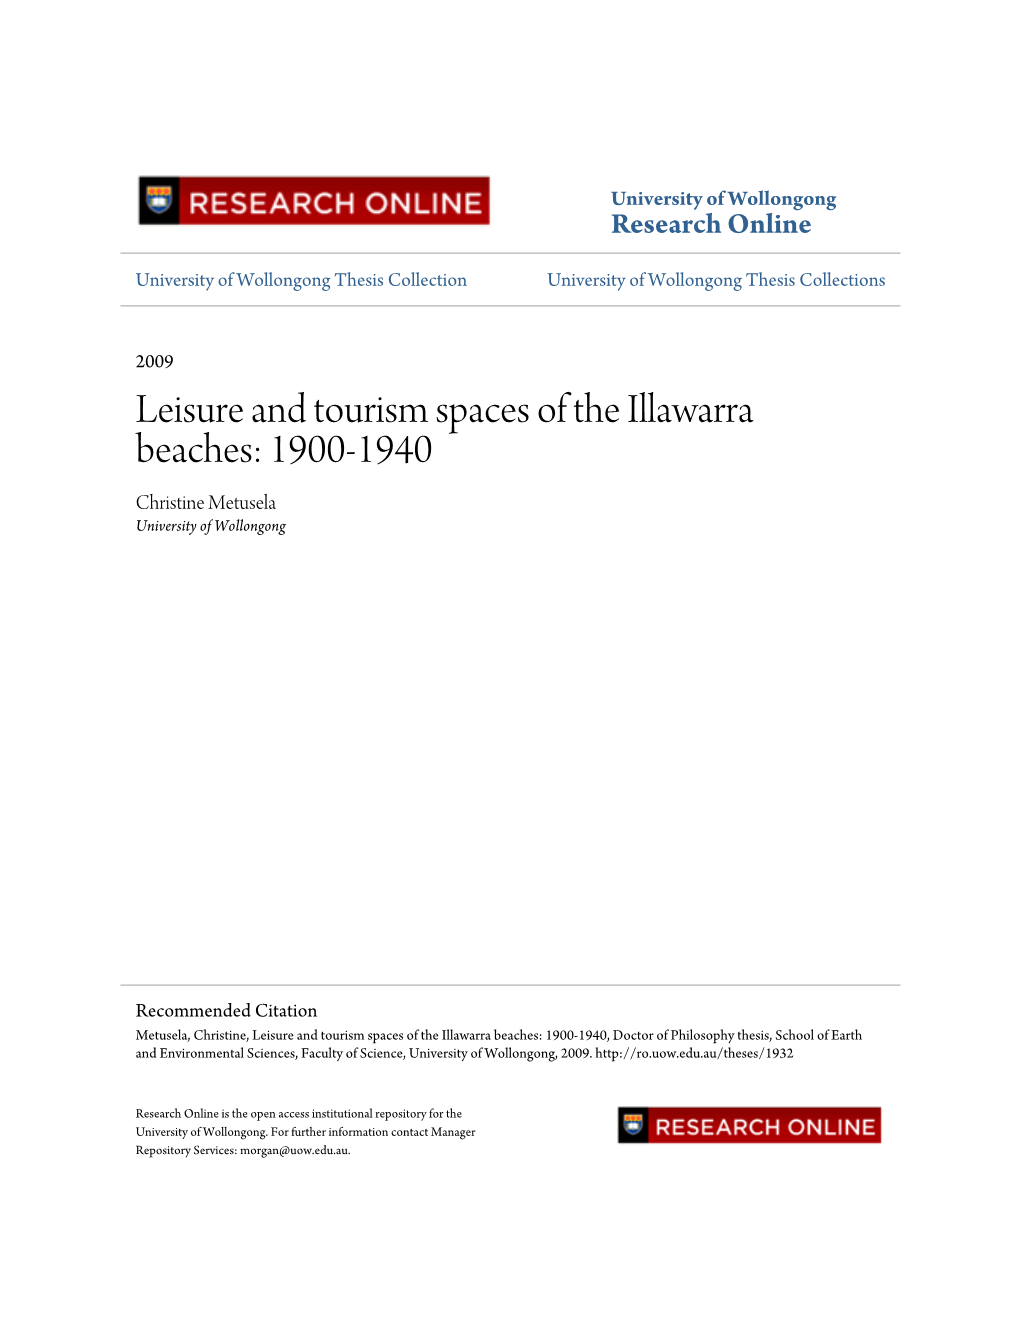 Leisure and Tourism Spaces of the Illawarra Beaches: 1900-1940 Christine Metusela University of Wollongong